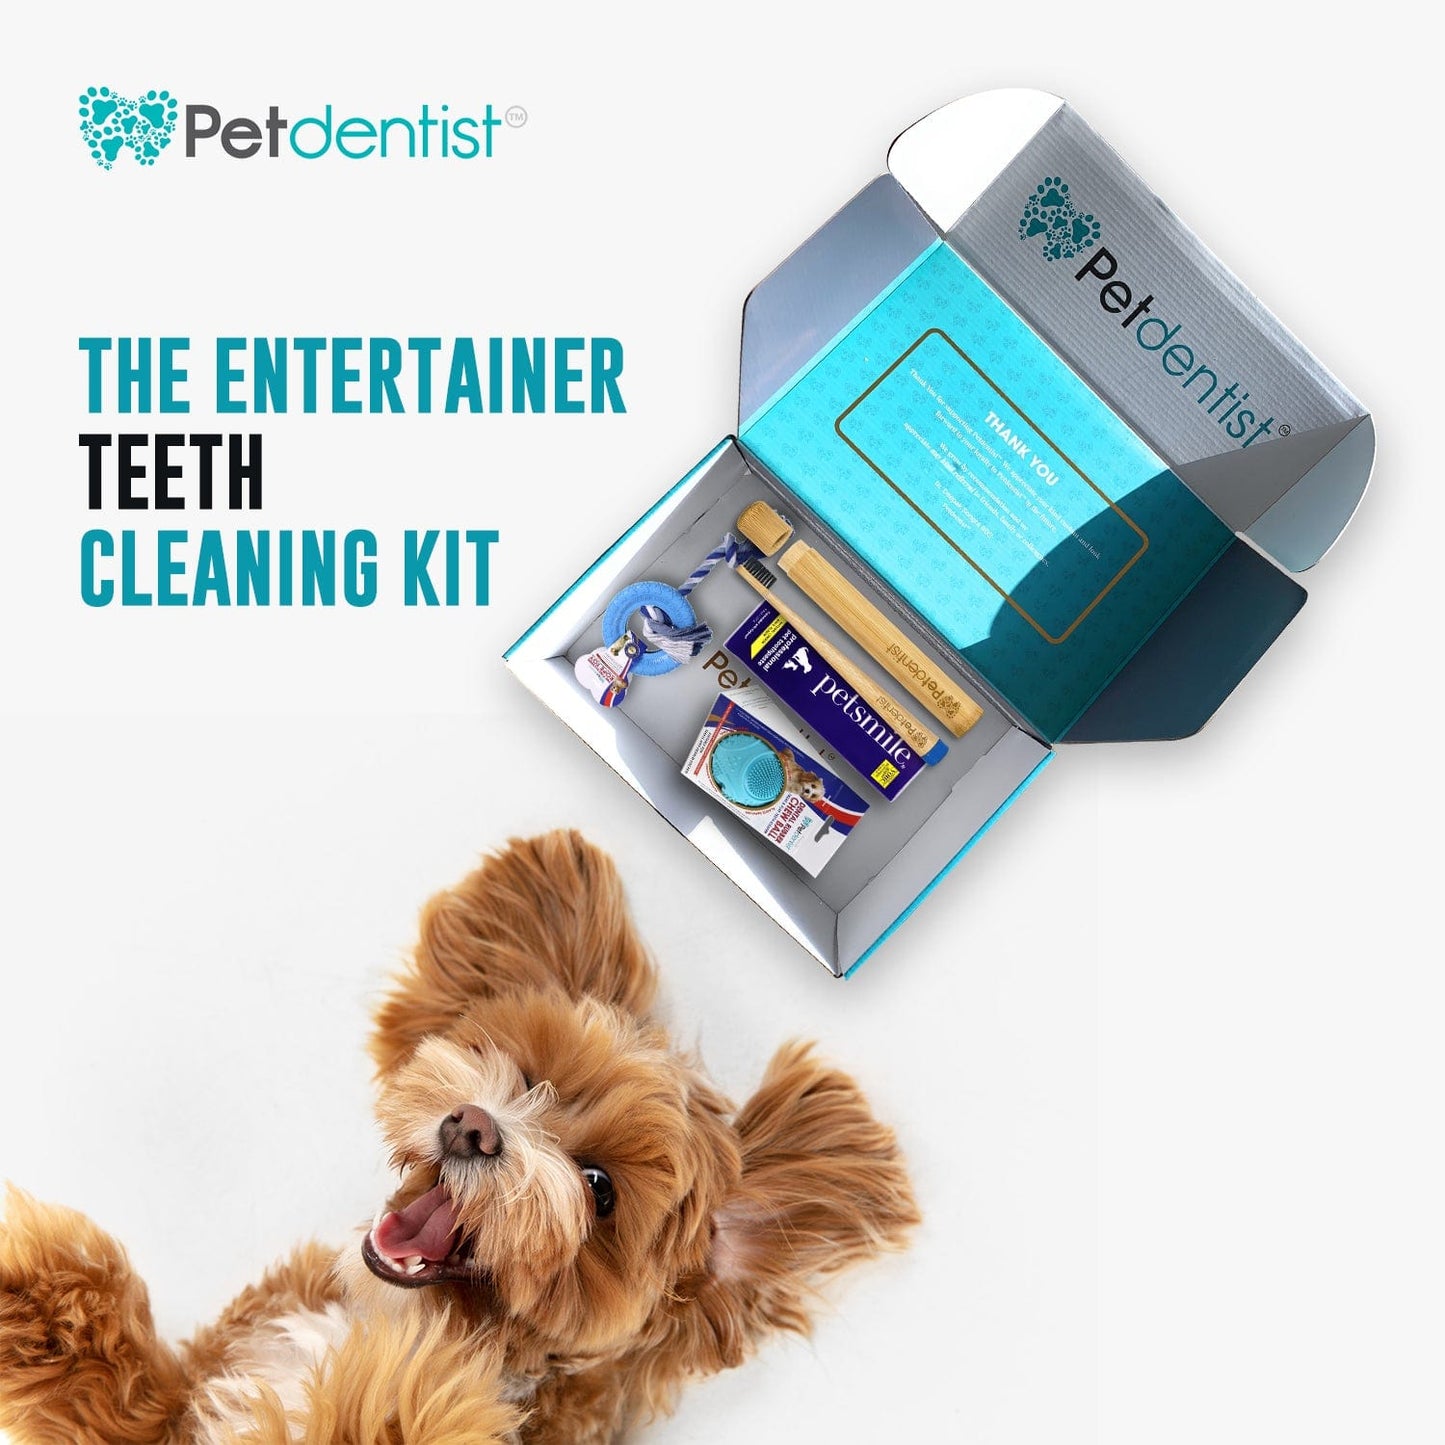 Petdentist® Pet Oral Care Supplies Petdentist®-THE ENTERTAINER Teeth Cleaning Kit Hamper Gift Set Box For FUN Dog Dental Care